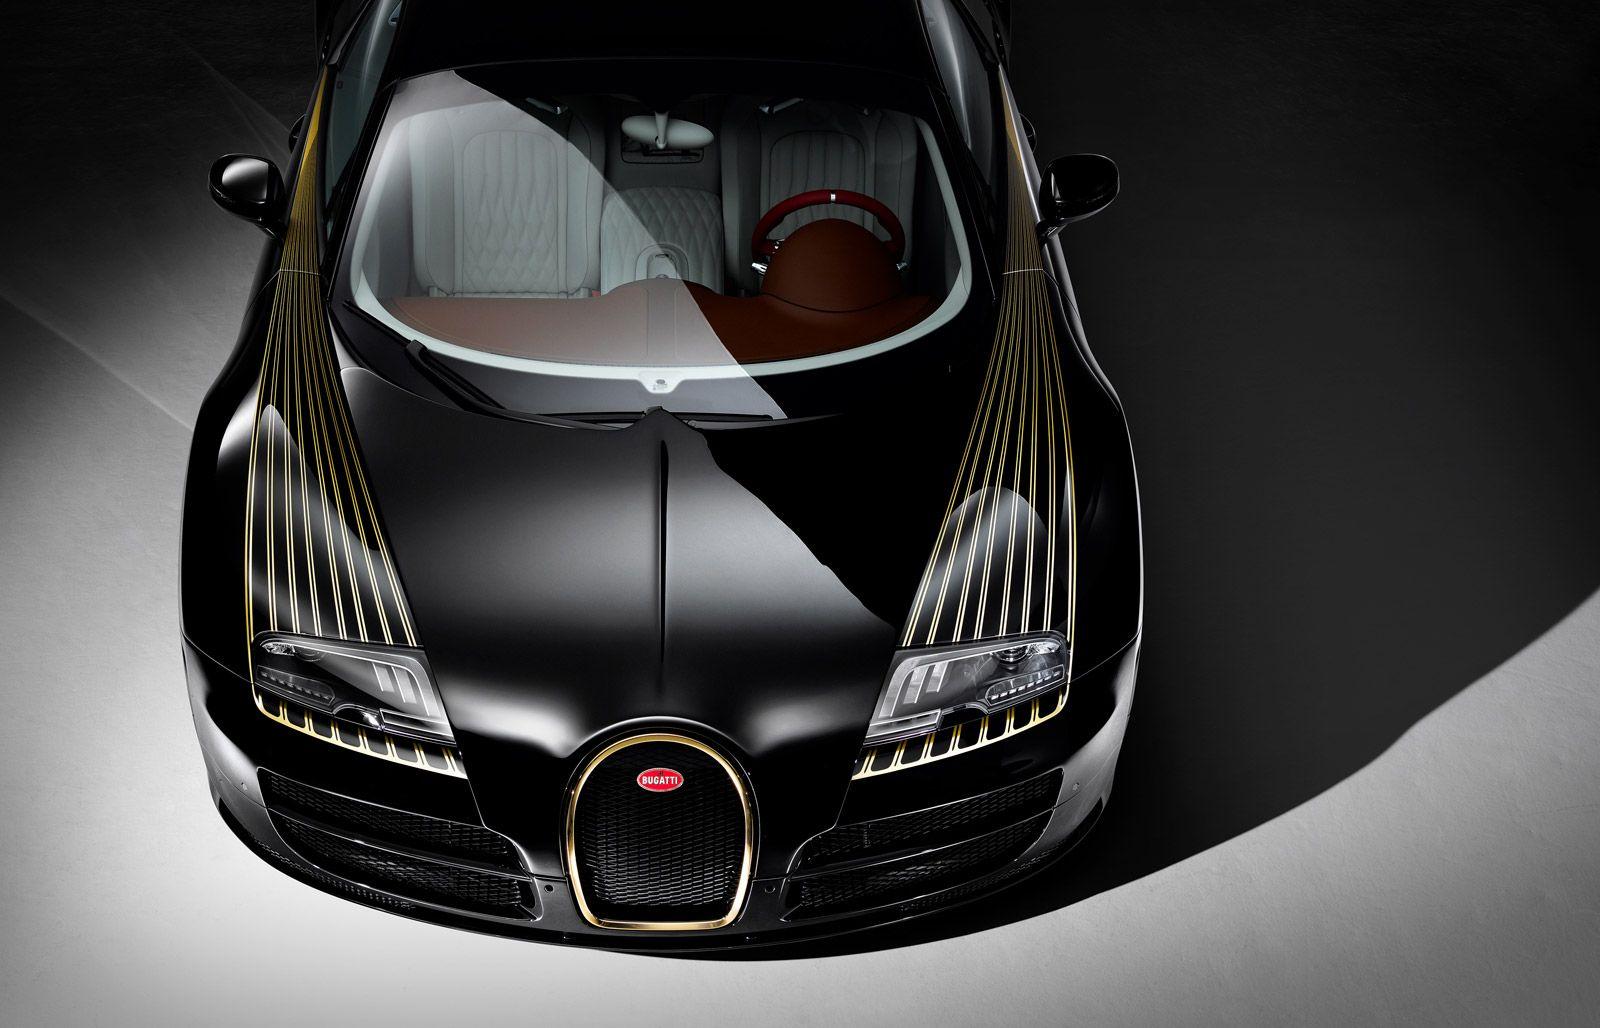 Bugatti's Next Car To Offer 500 HP, Outpace Veyron Super Sport: Report